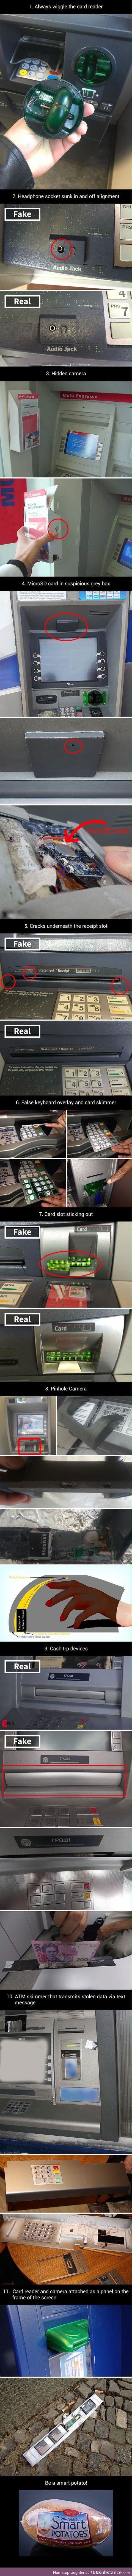 This will help you notice fake ATM machines